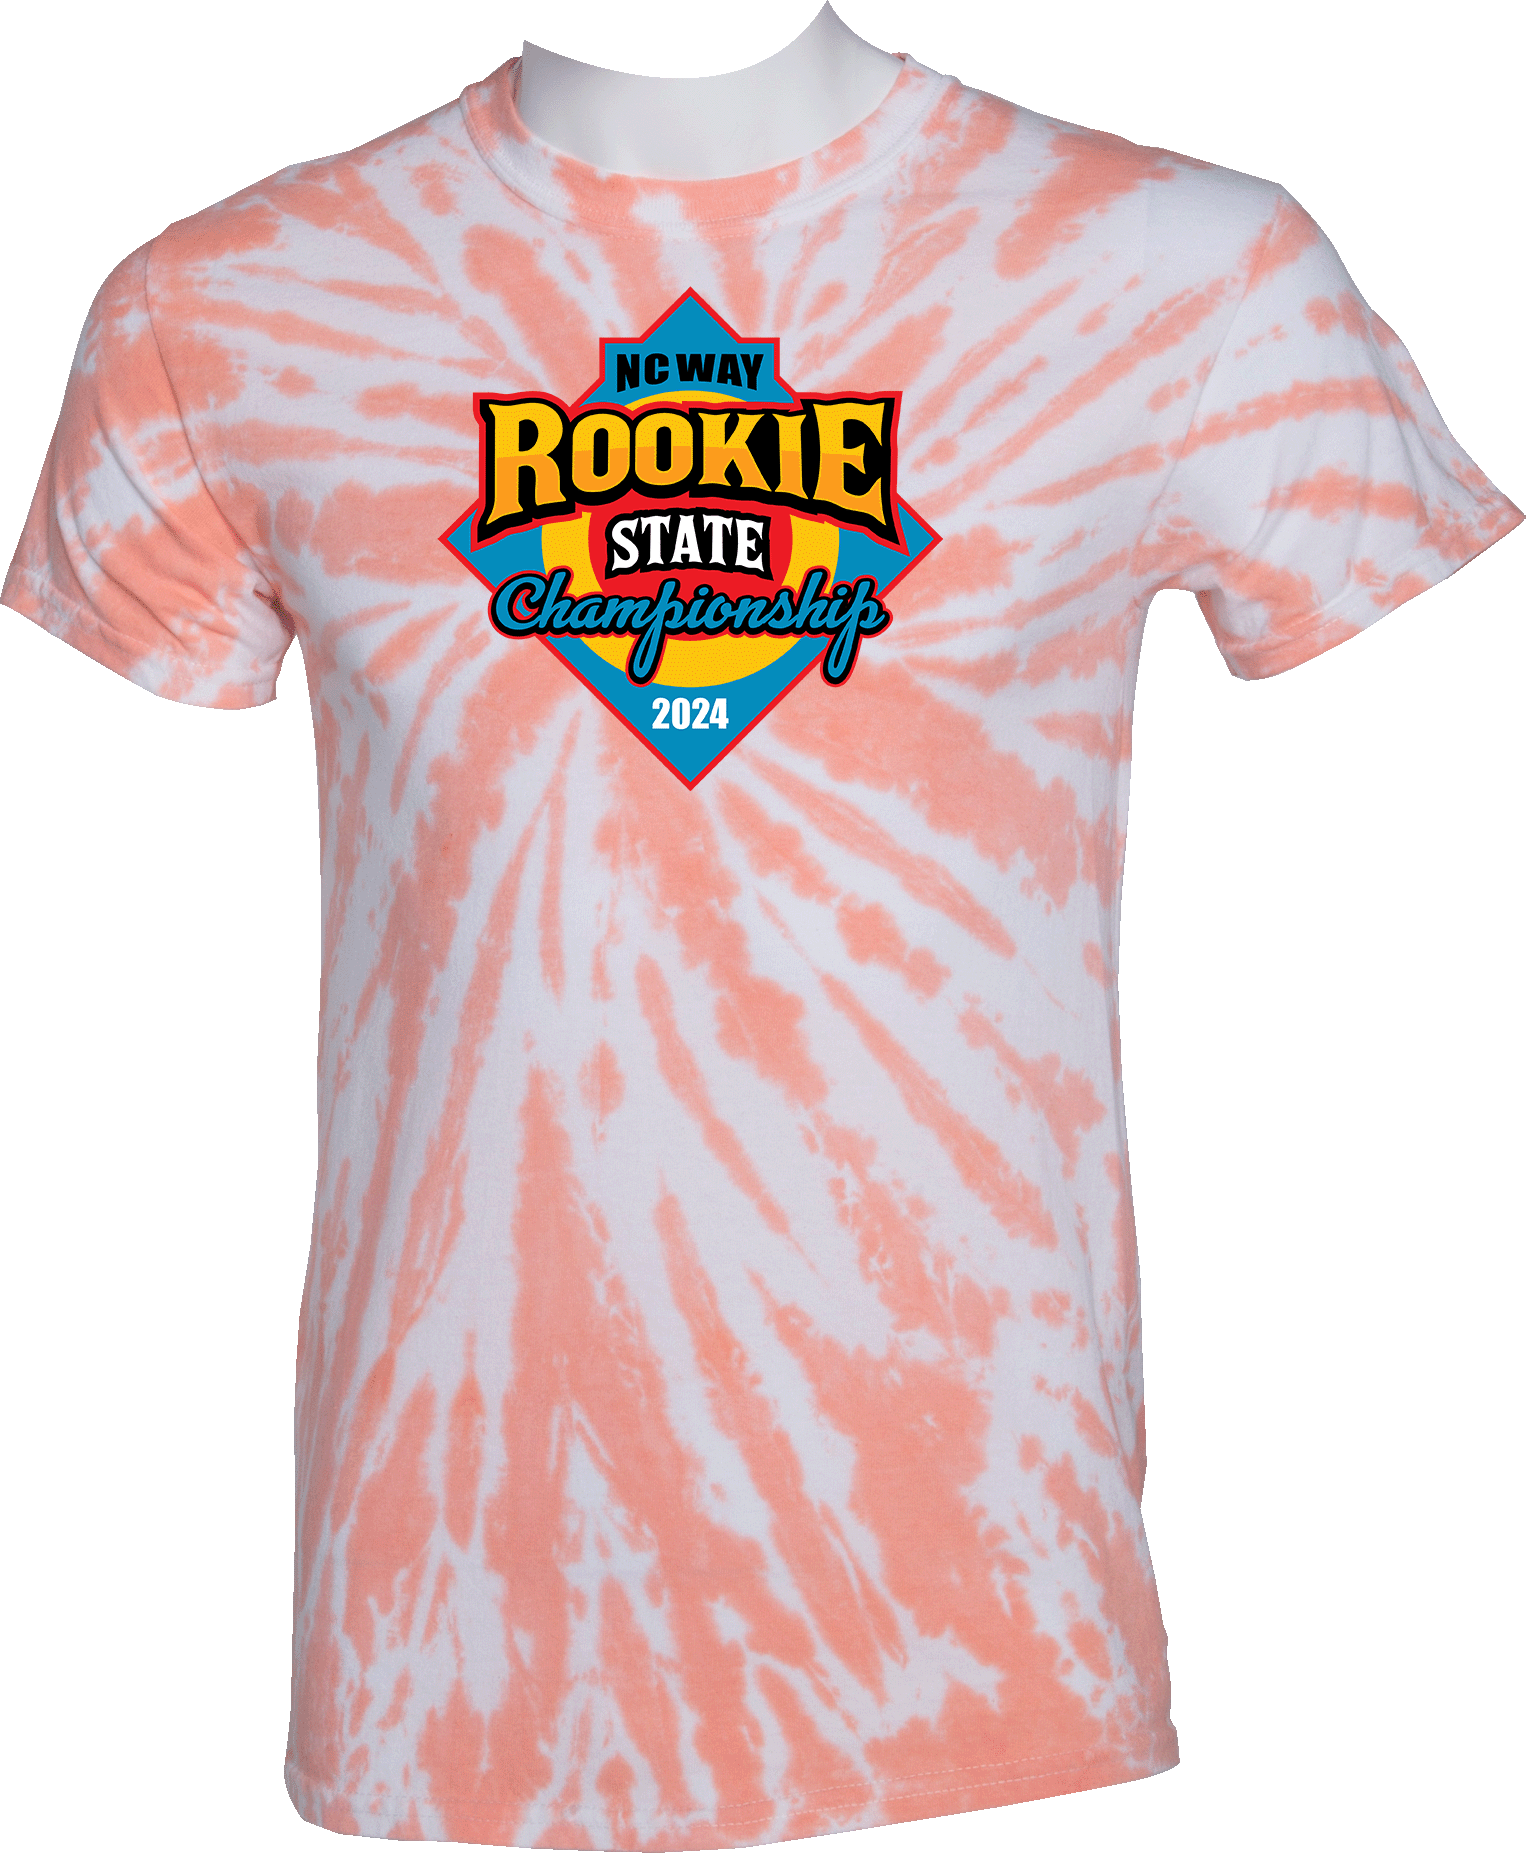 Tie-Dye Short Sleeves - 2024 NCWAY Rookie State Championship